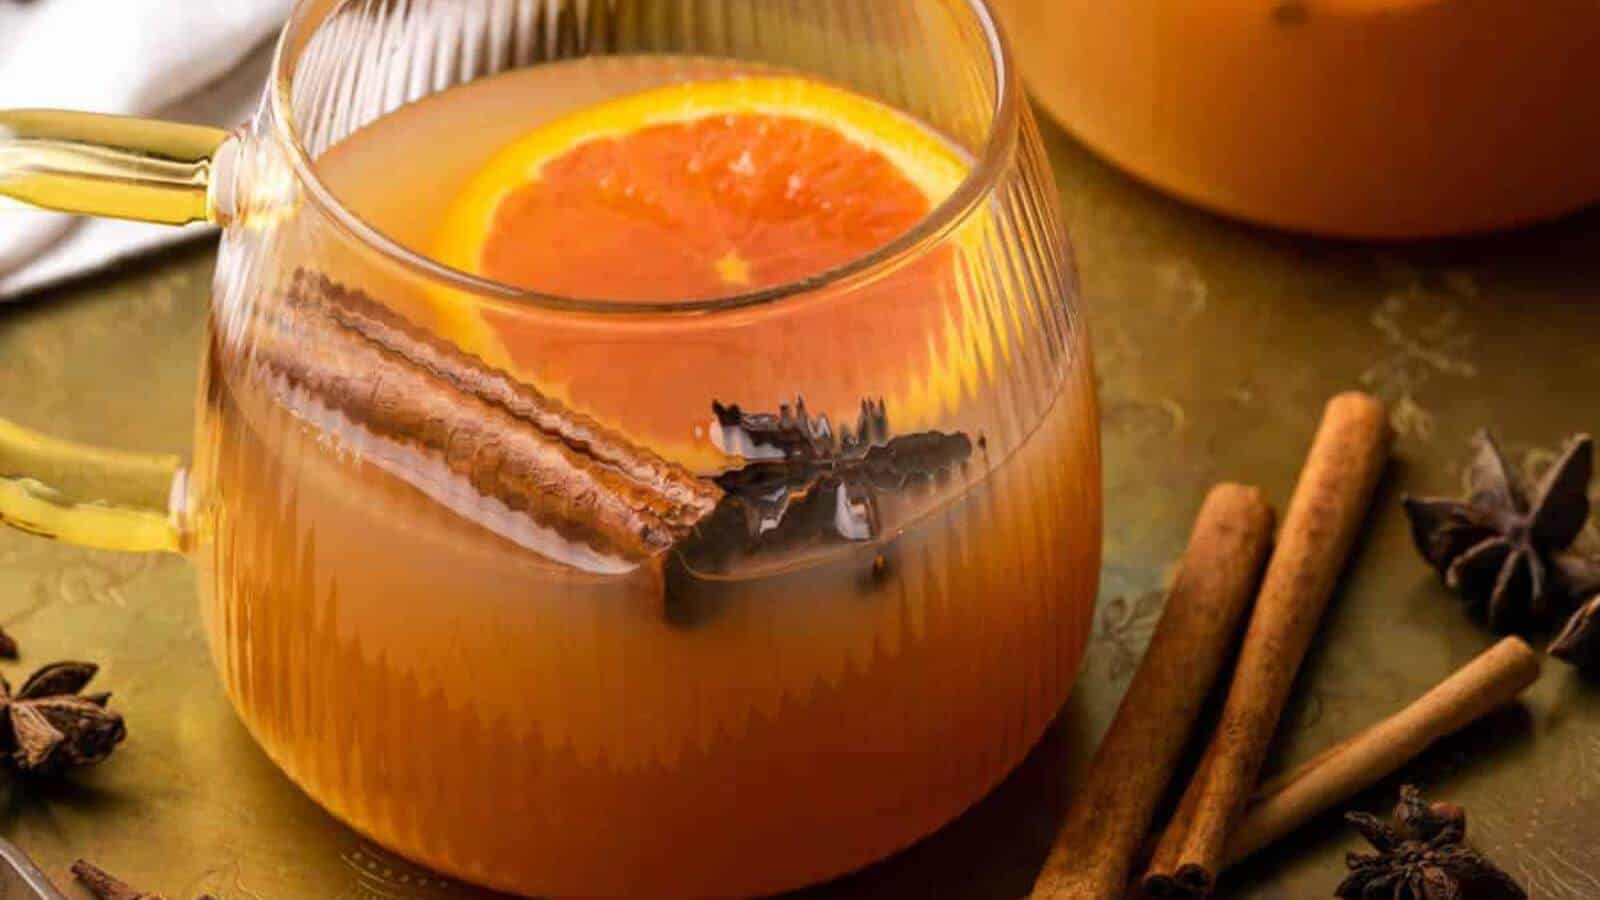 Mulled cider with an orange slice, cinnamon stick and star anise.